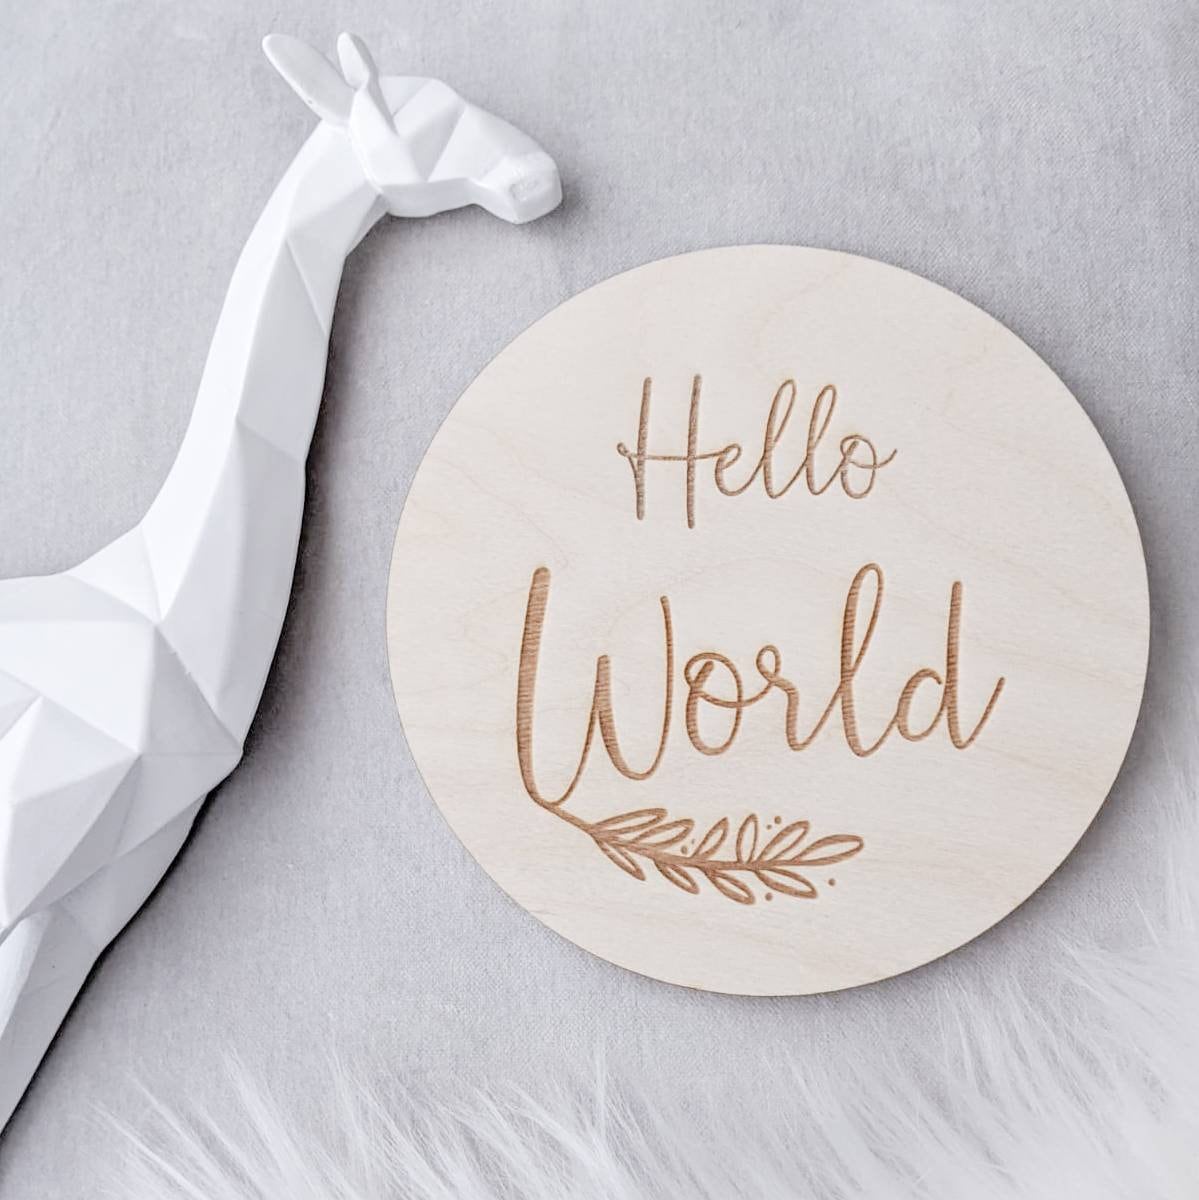 Hello World Baby Announcement - Engraved Wooden Pregnancy Announcement Plaque - Baby Milestone Card